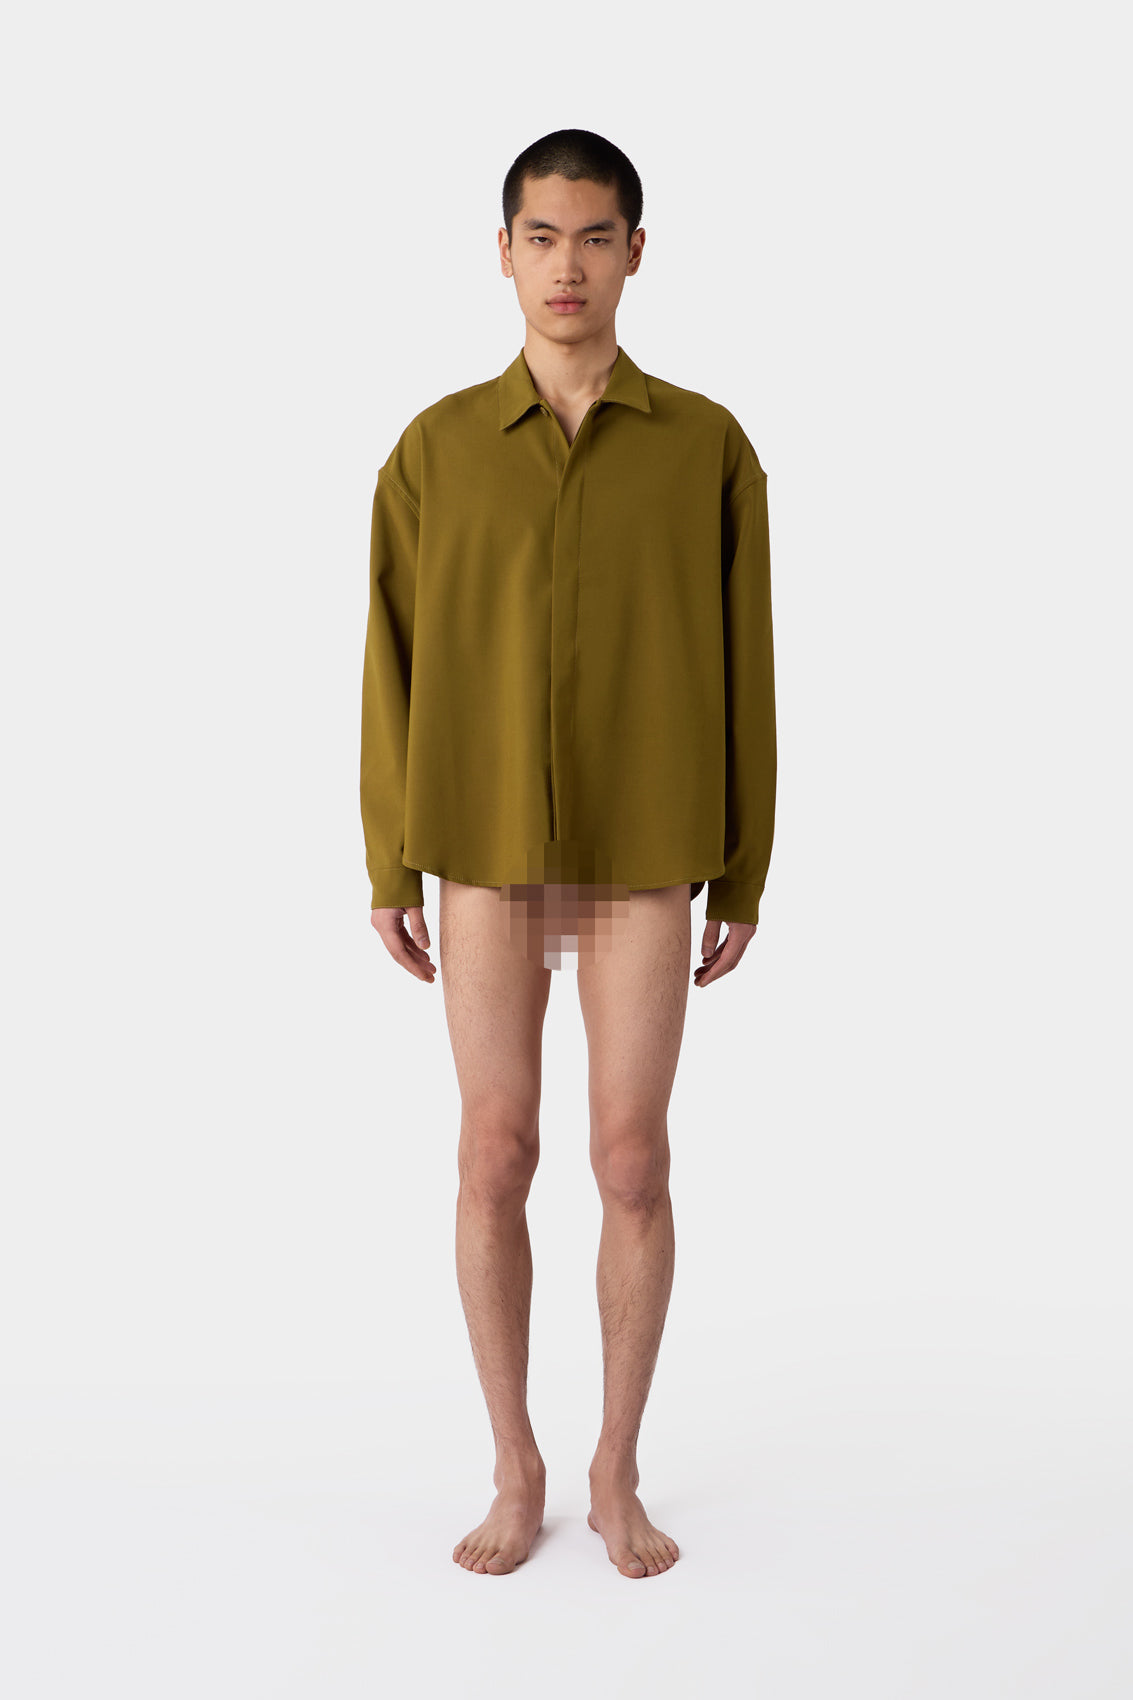 OVER SHIRT / olive green